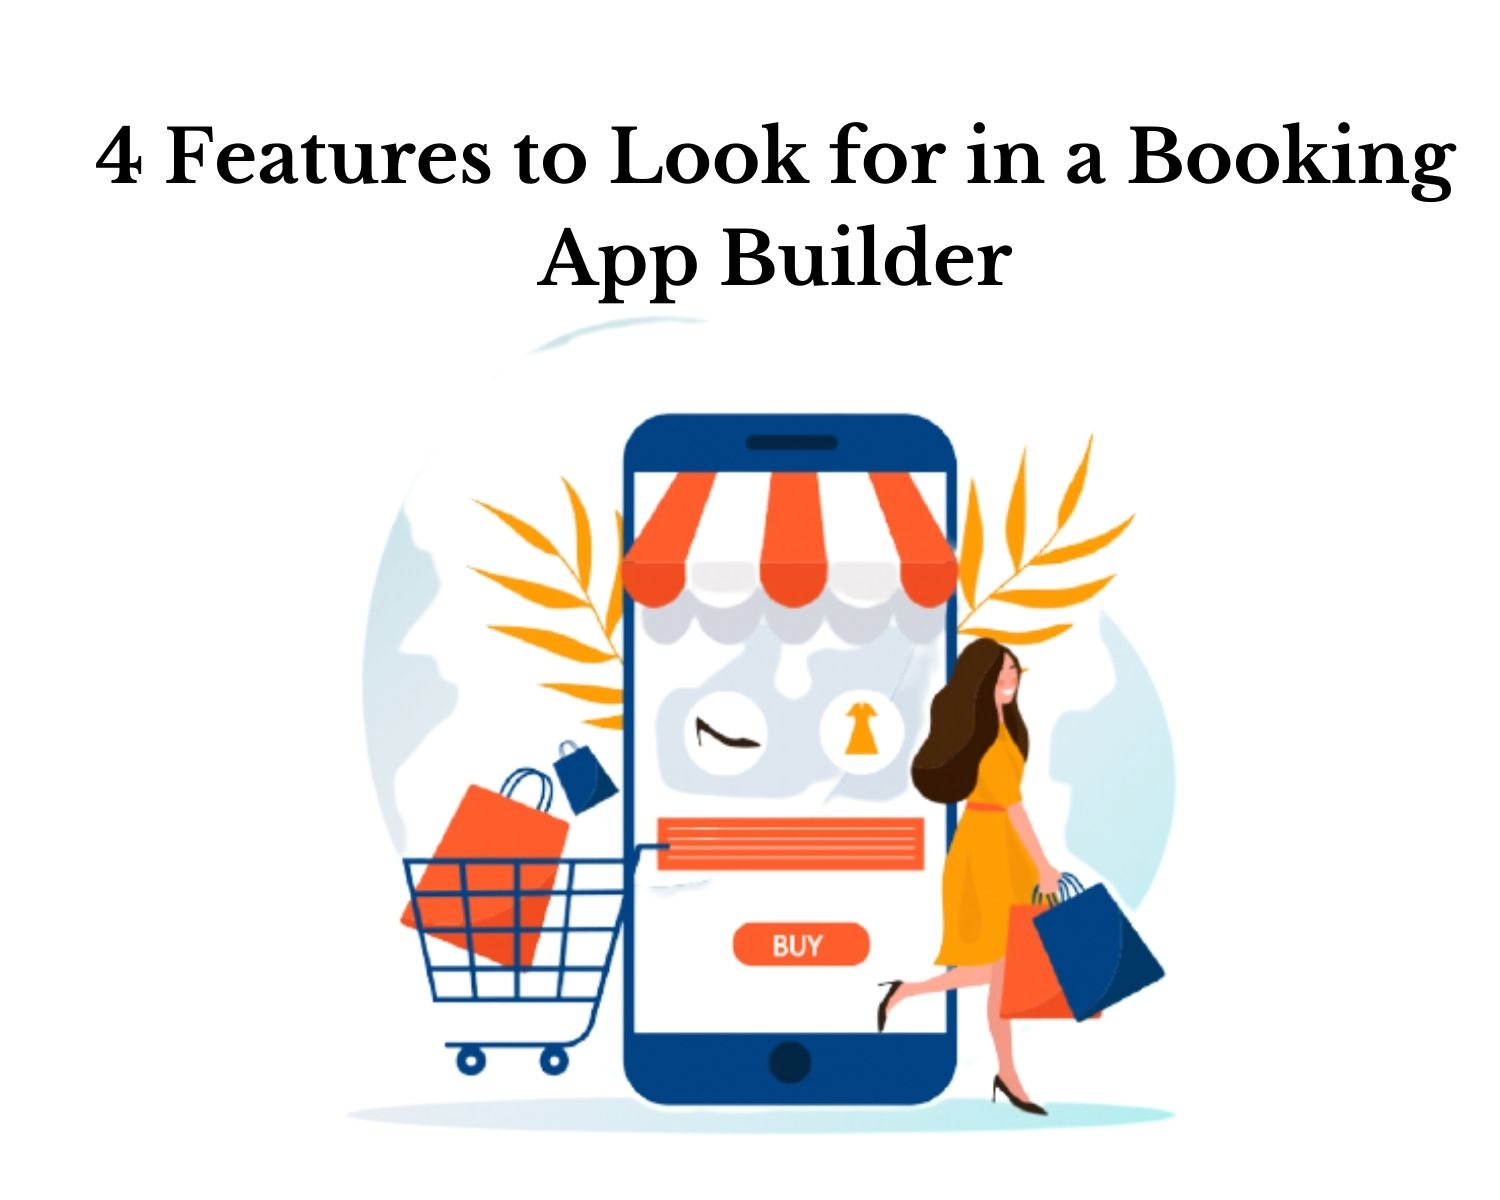 Which Features Should You Look for in a Booking App Builder?